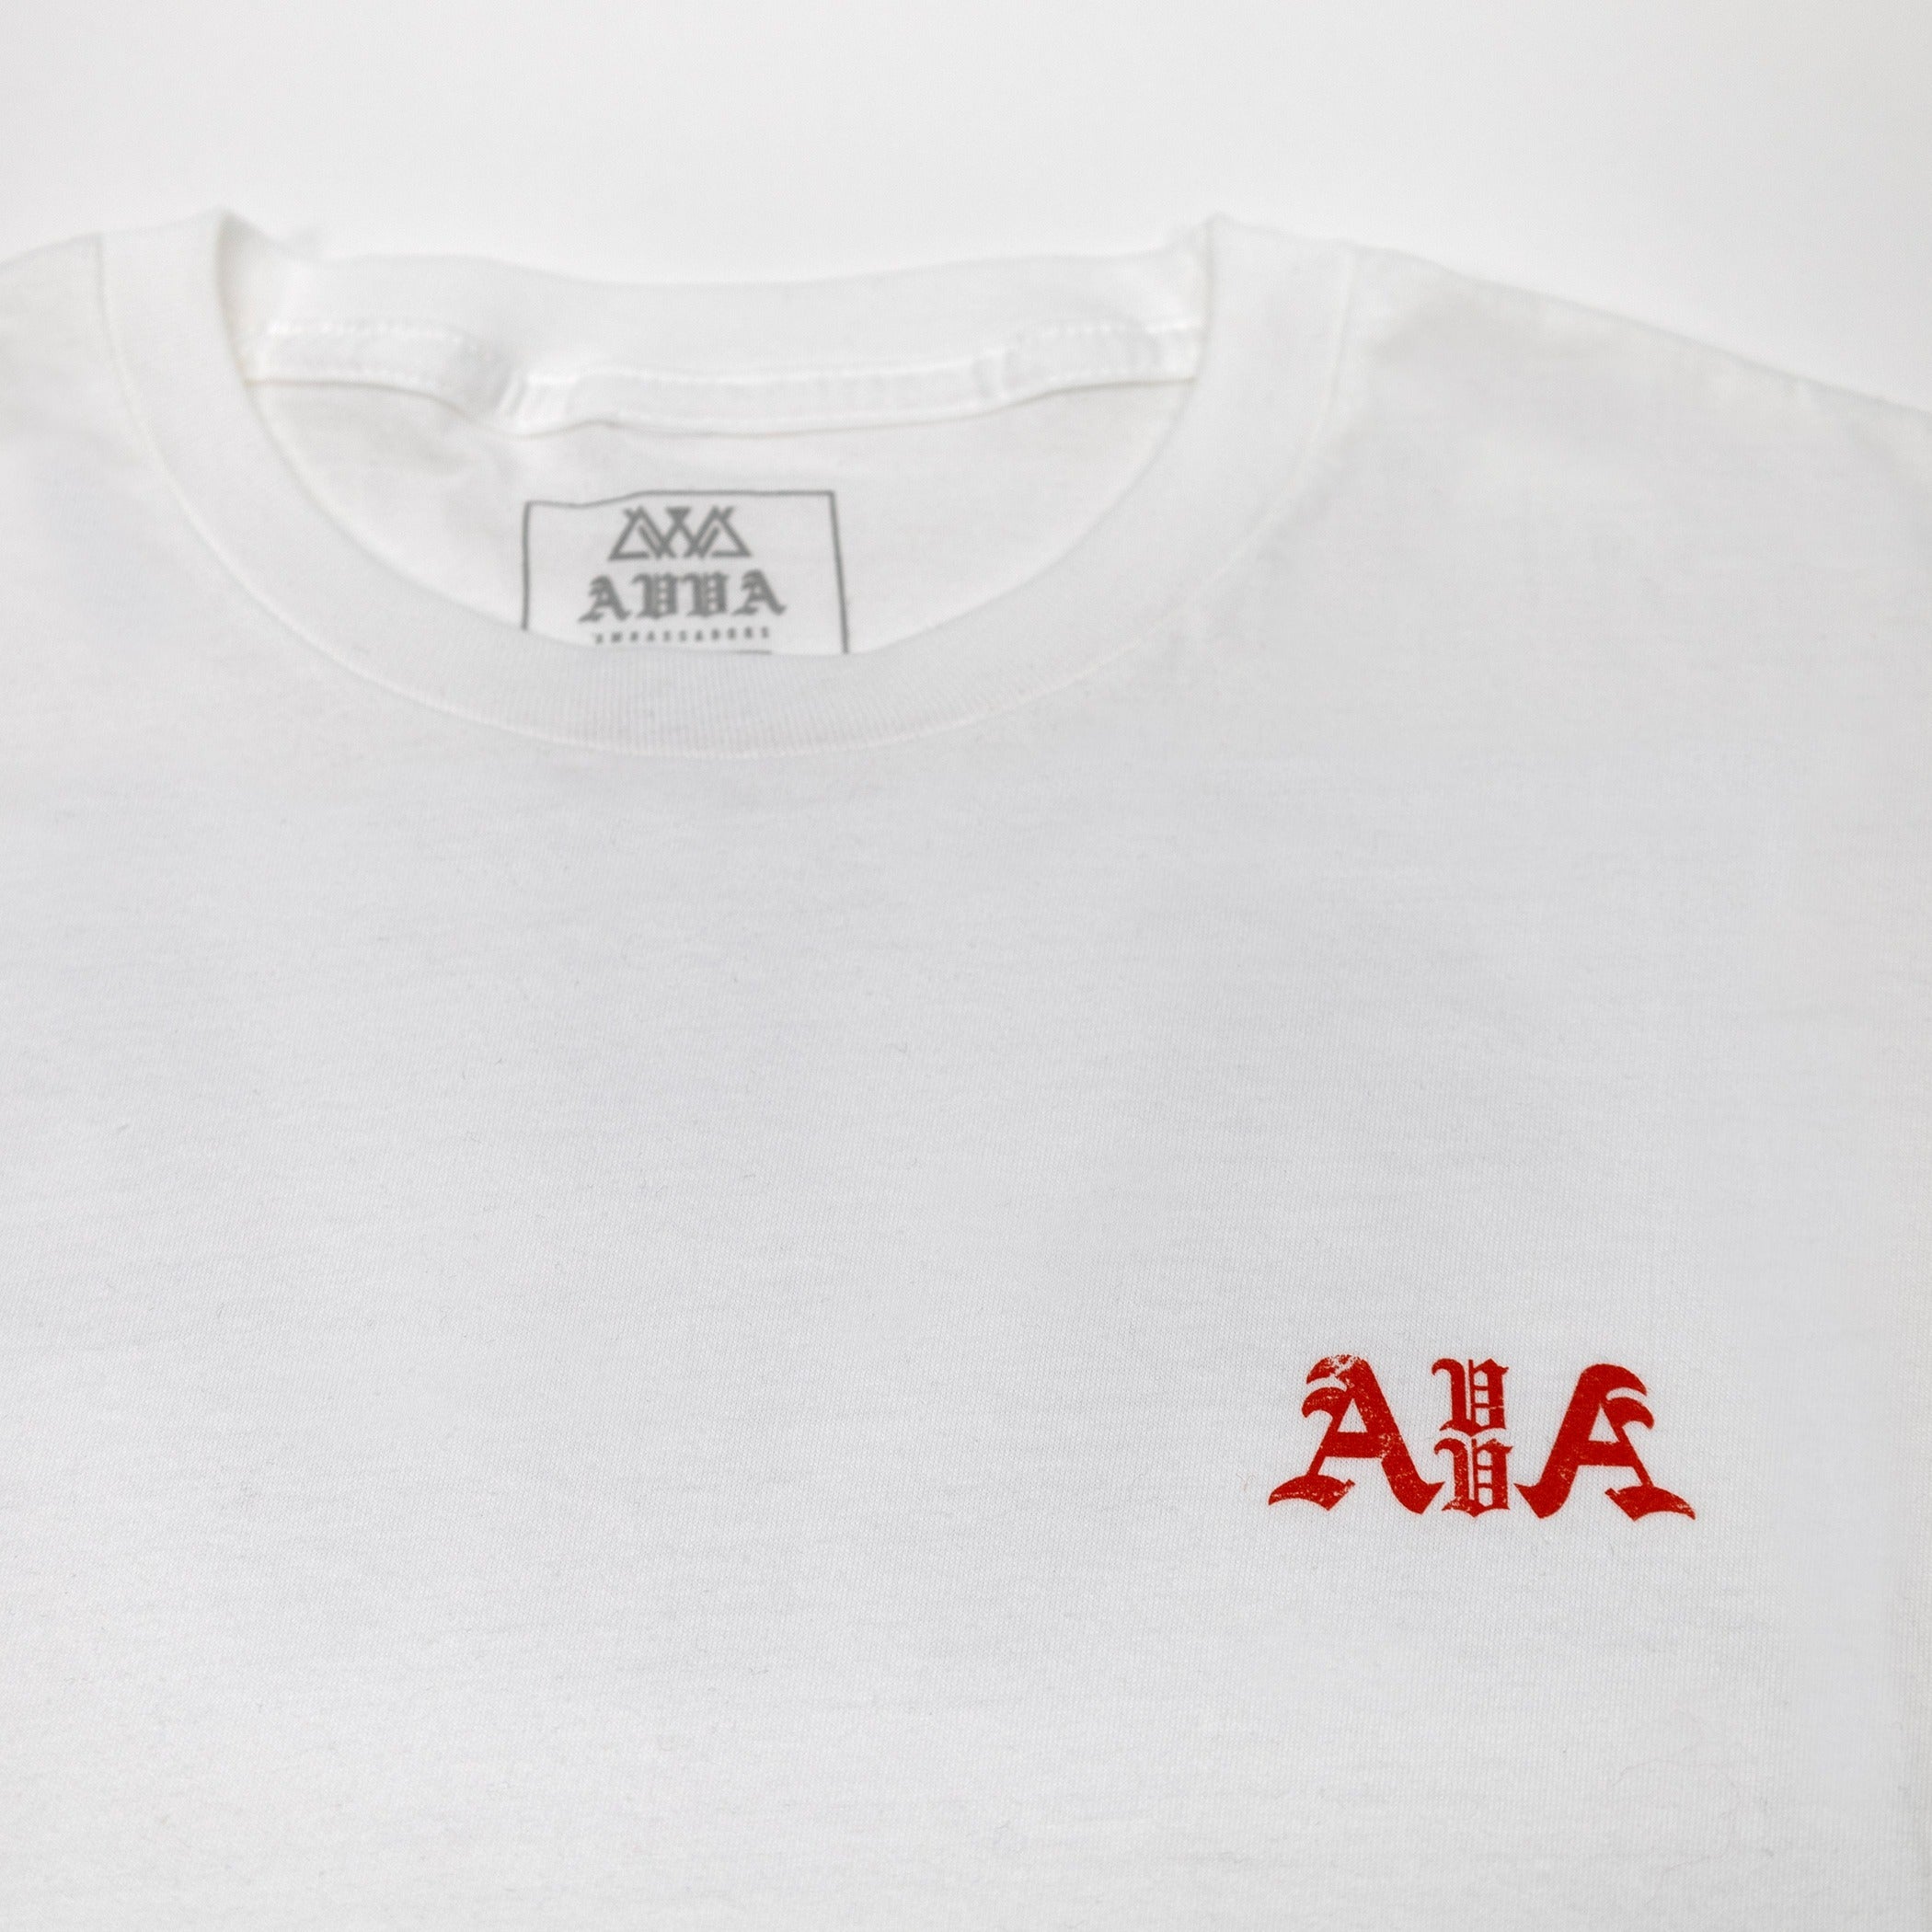 CLOSE UP OF FRONT AVVA LOGO IN RED.